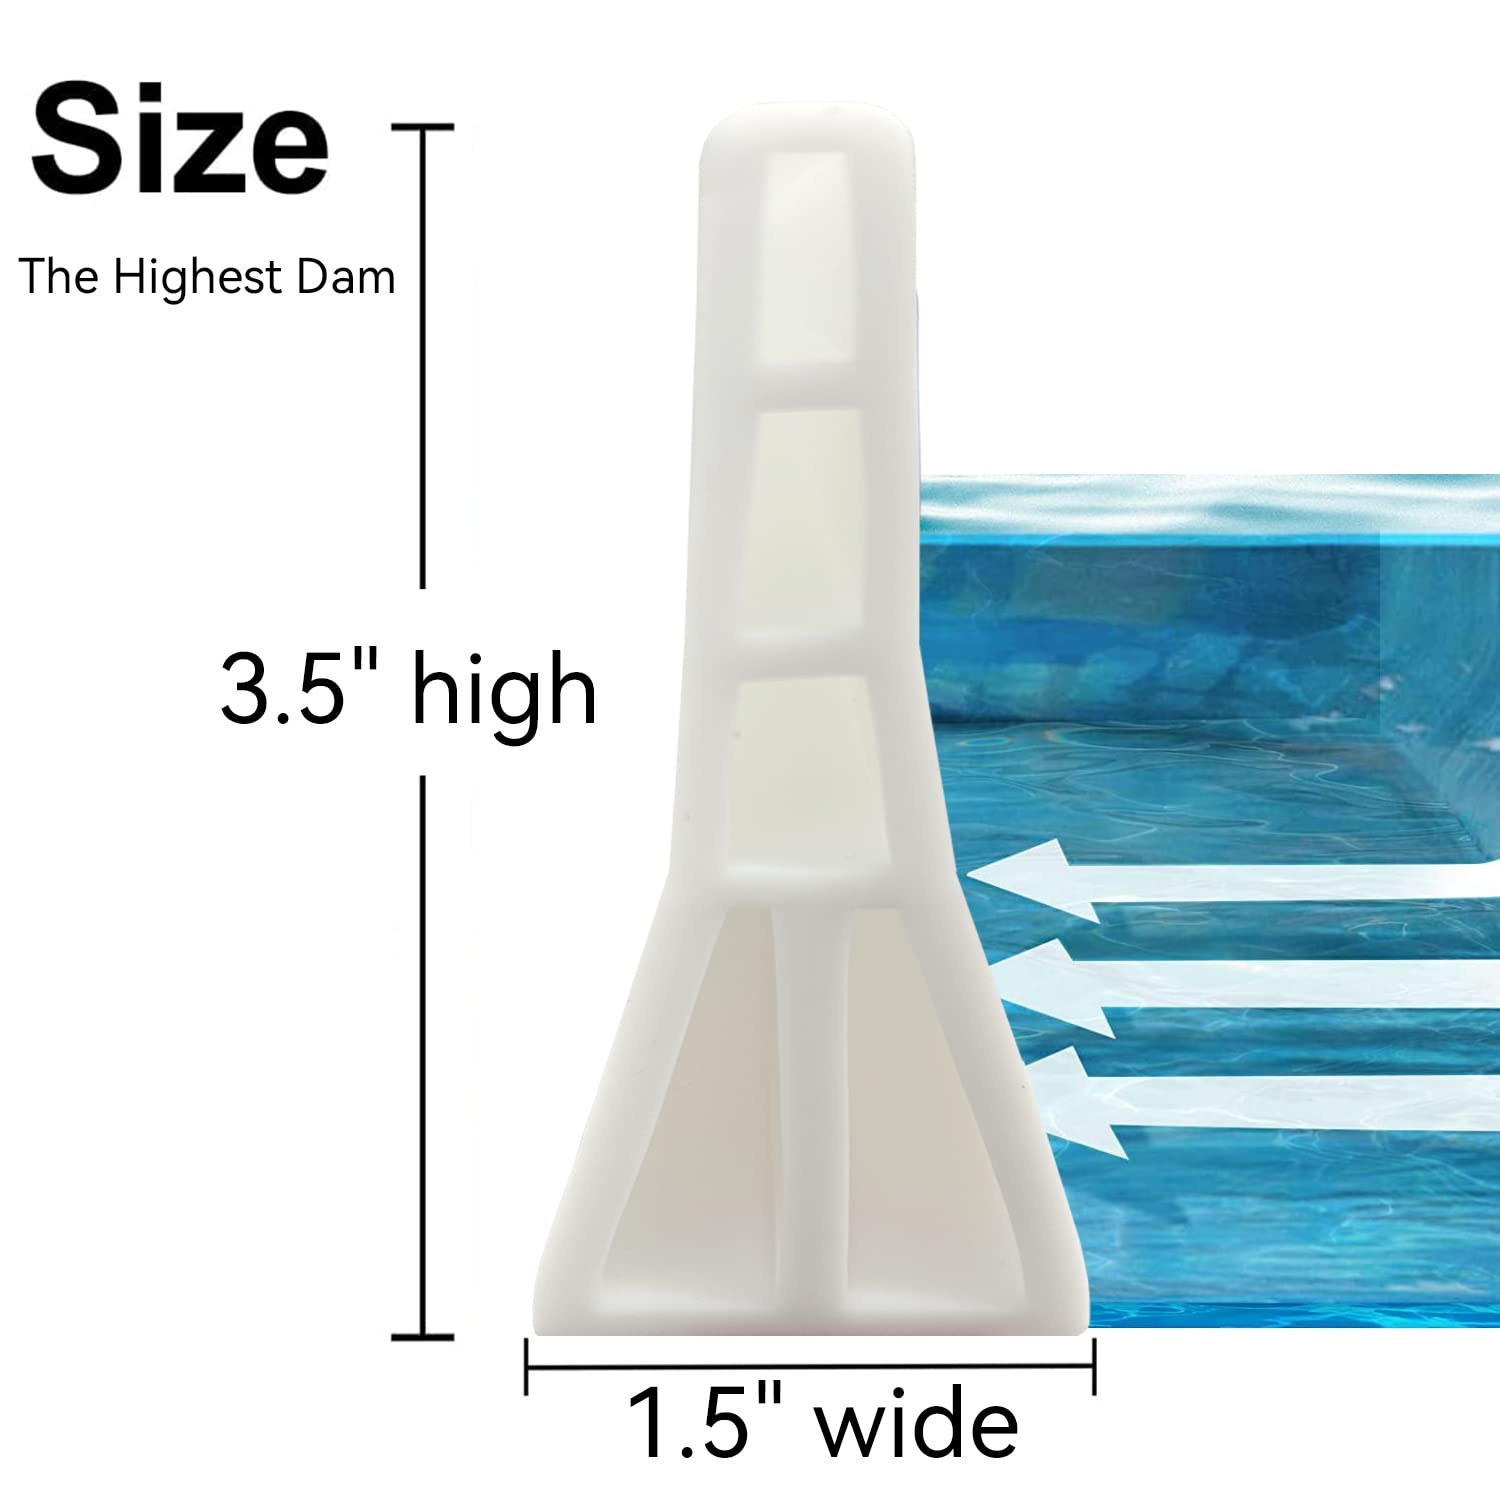 3.5" High Shower Water Splash Guard 59"Collapsible Shower Threshold Water Dam 3.5In Tall Shower Dam Water Stopper Shower Guards To Keep Water In Shower Lip Water Barrier For Shower Dry And Wet4.92Ft